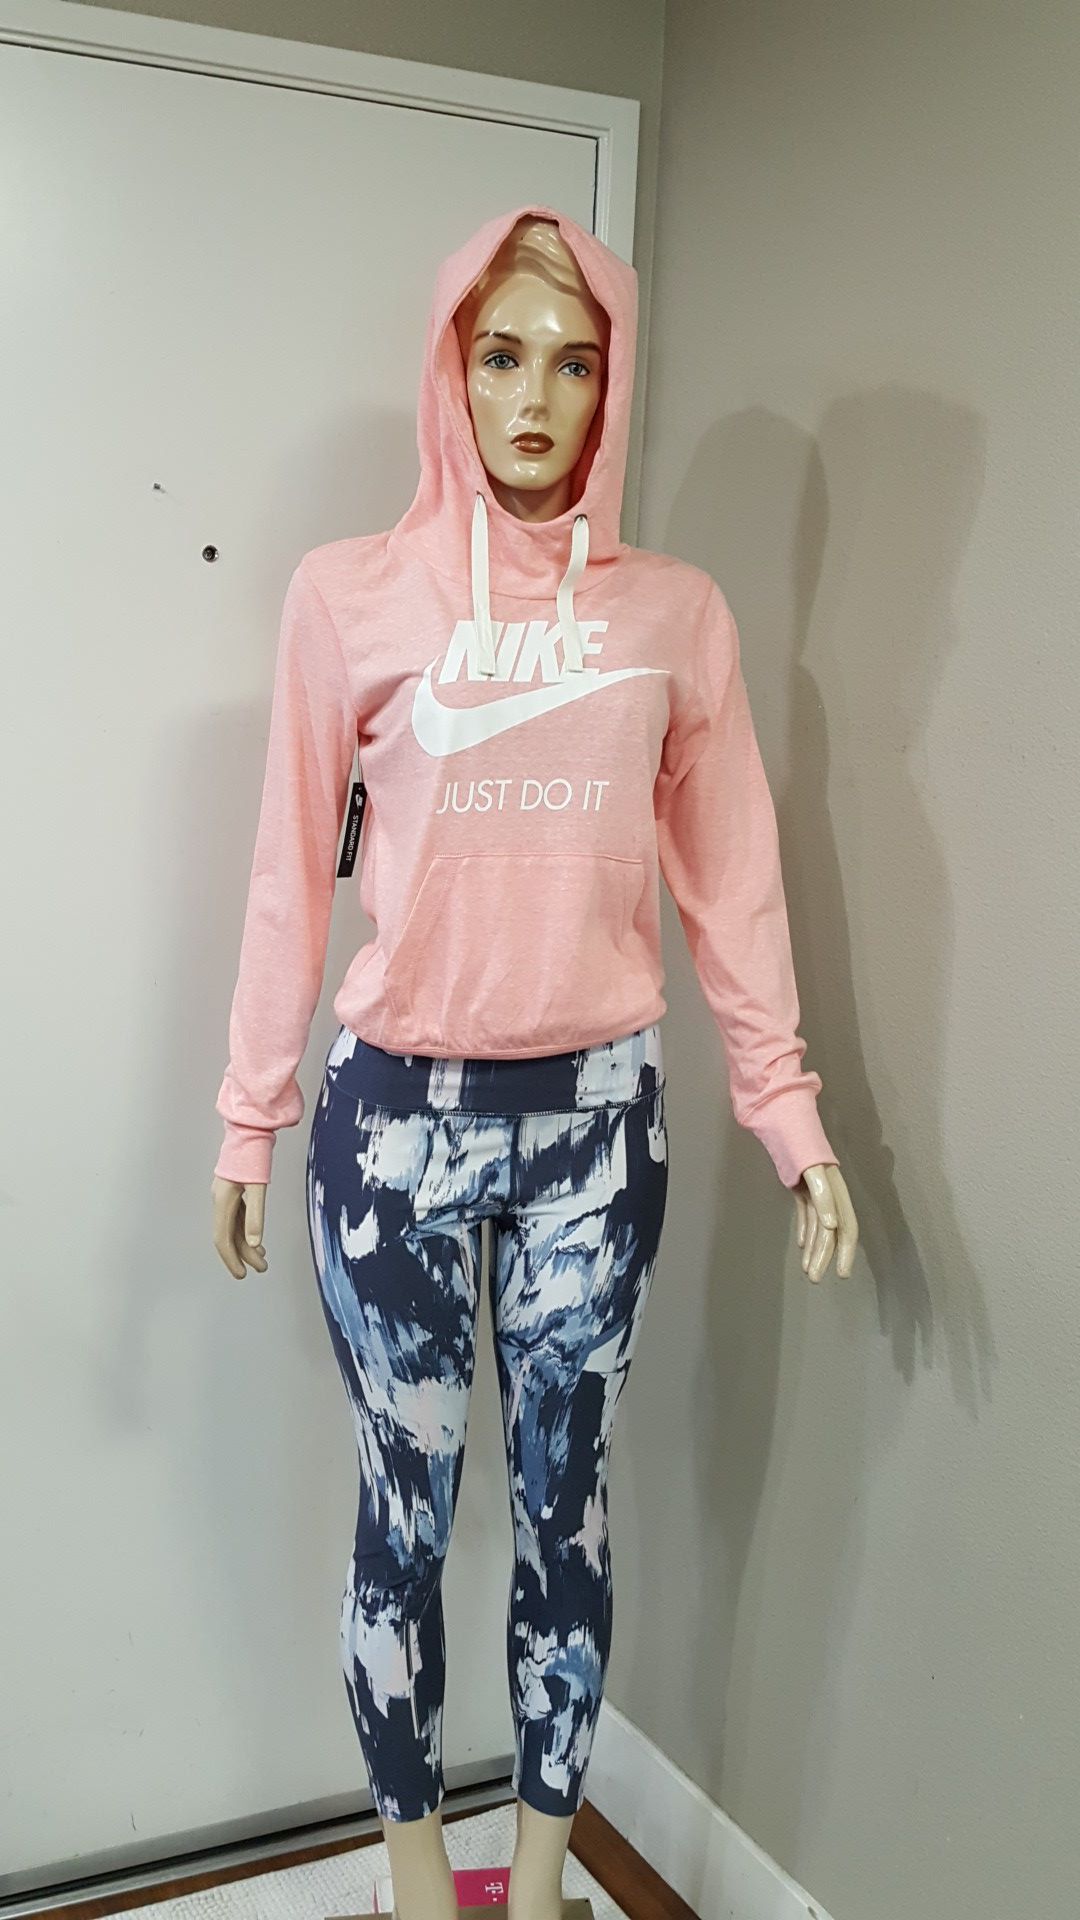 NEW WOMEN'S NIKE SIZE SMALL NEW WITH TAGS